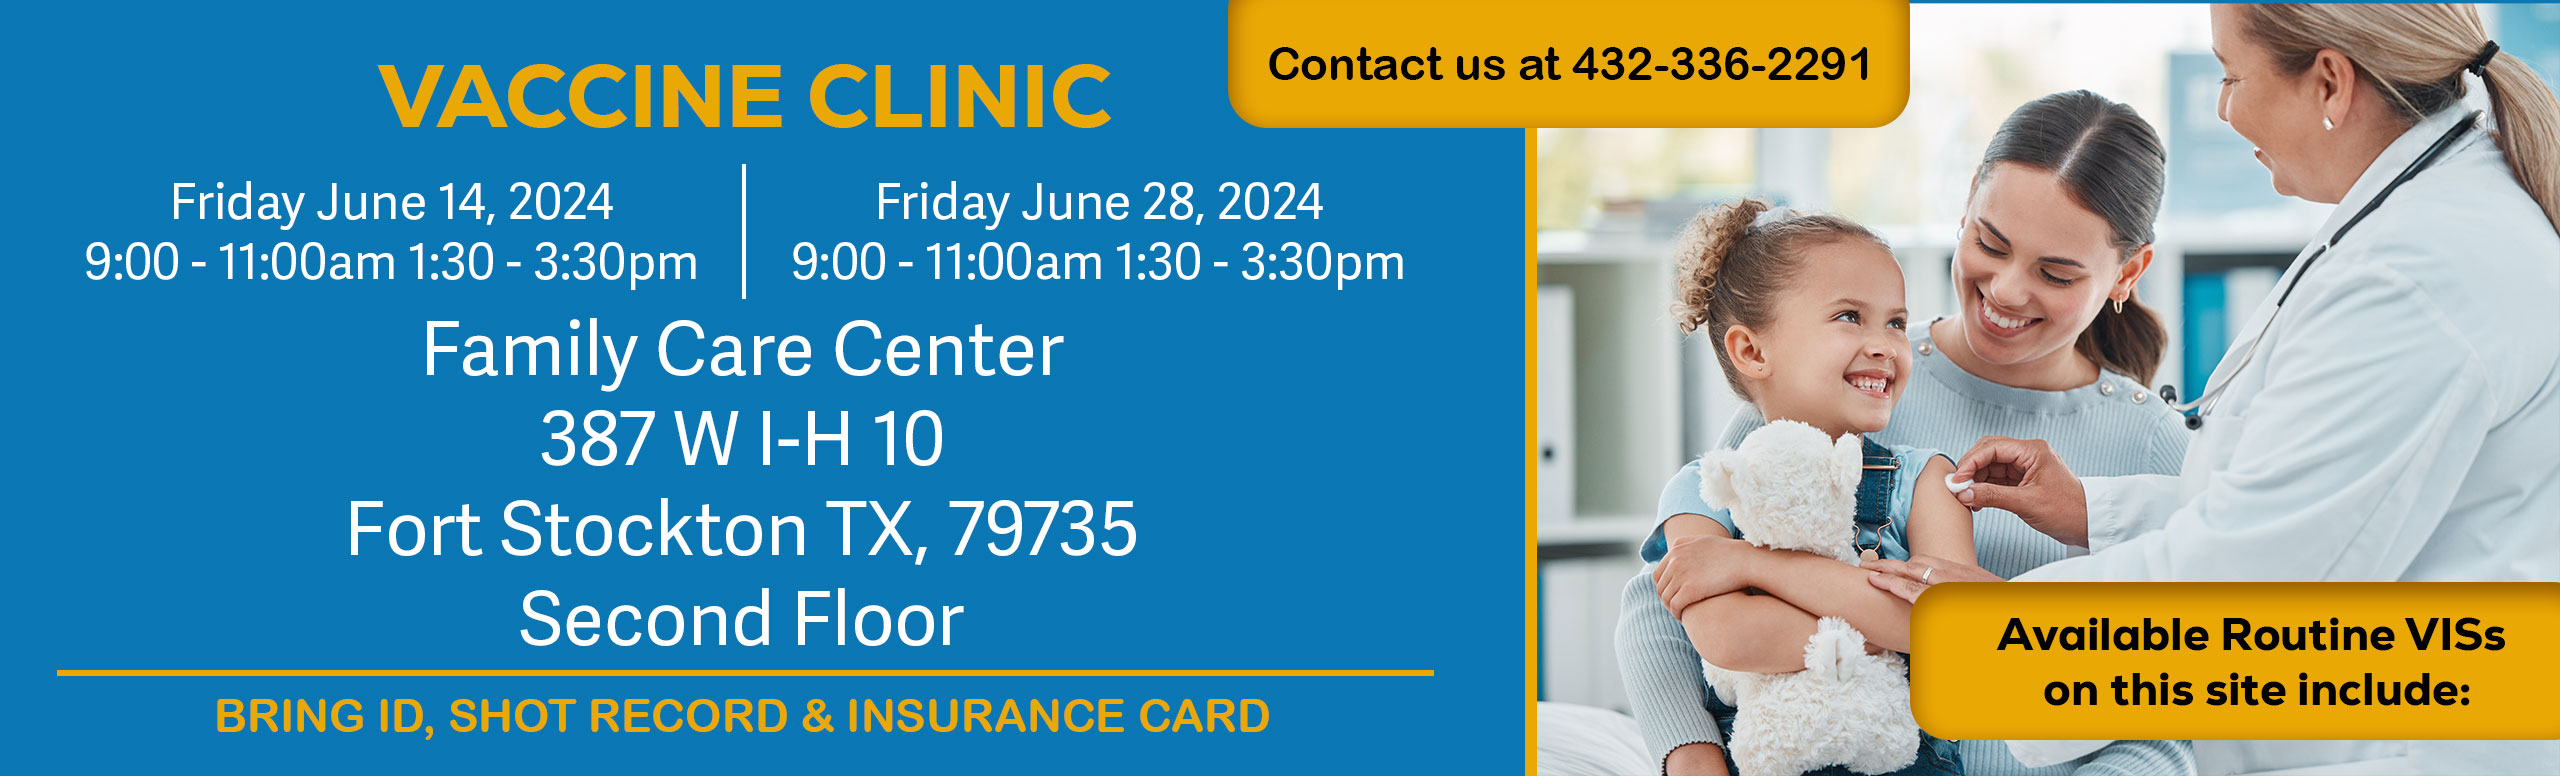 vaccine clinic at Family Care center June 14th and 28th at 9:00am- 11:00am and 1:30pm- 3:30pm